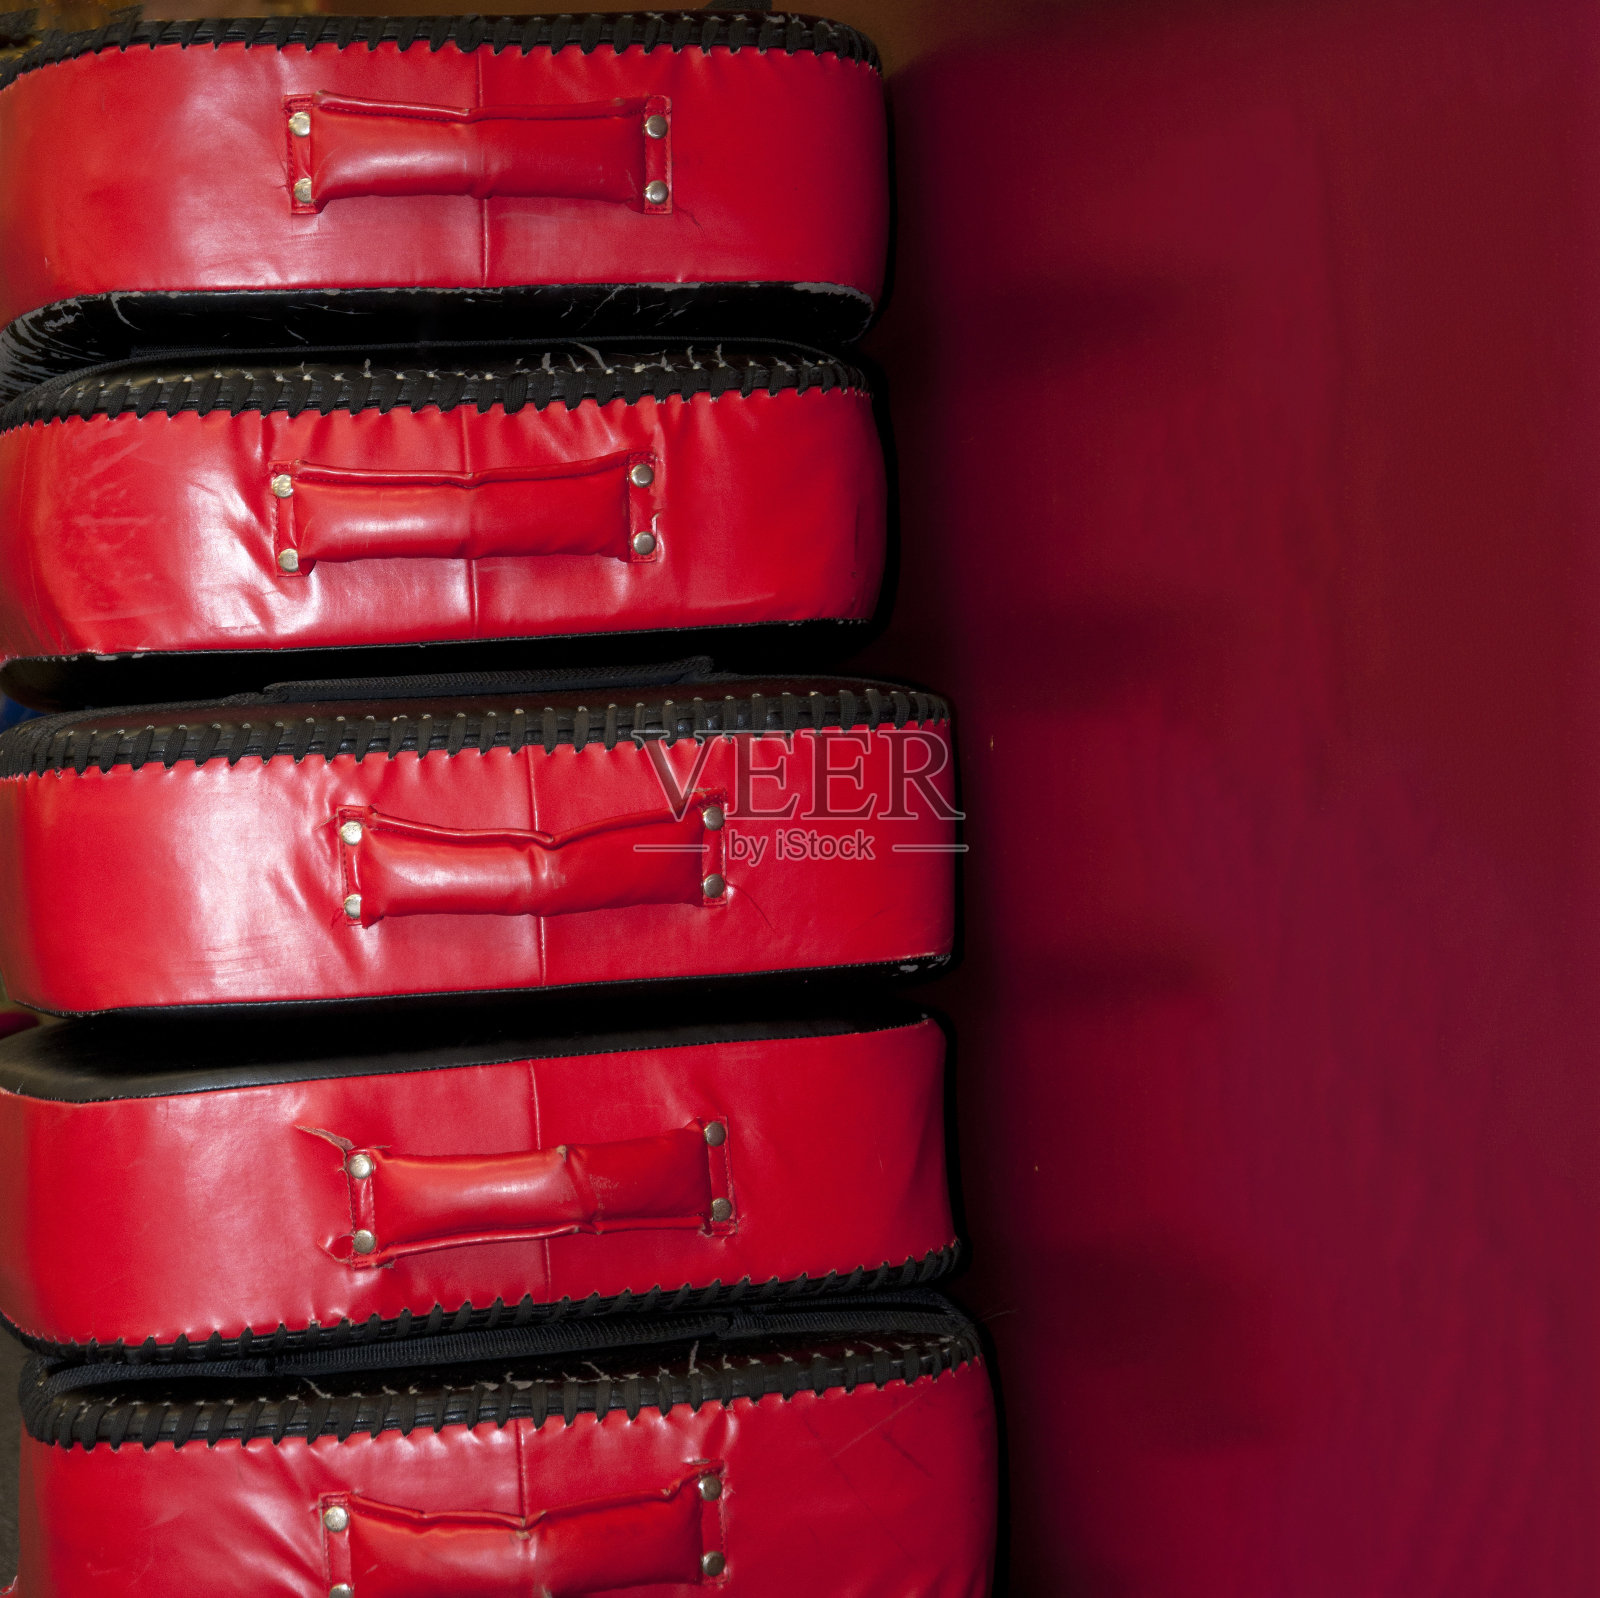 Red Martial Arts Striking Pads Ready for Use照片摄影图片